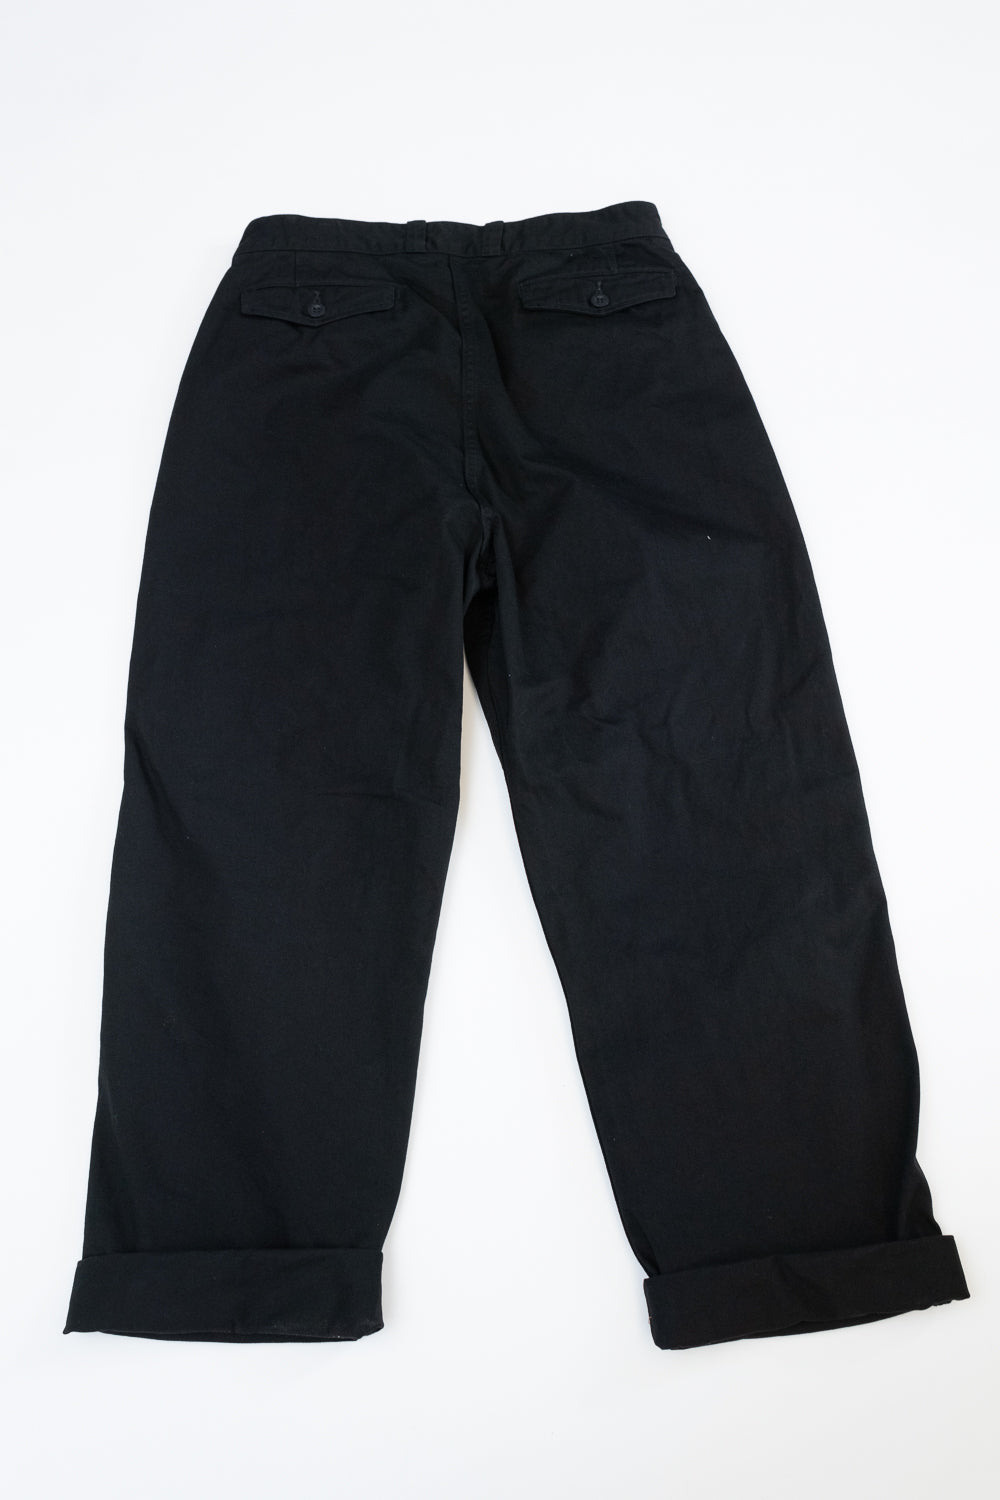 03-5252-61 - M-52 French Army Trouser - Black